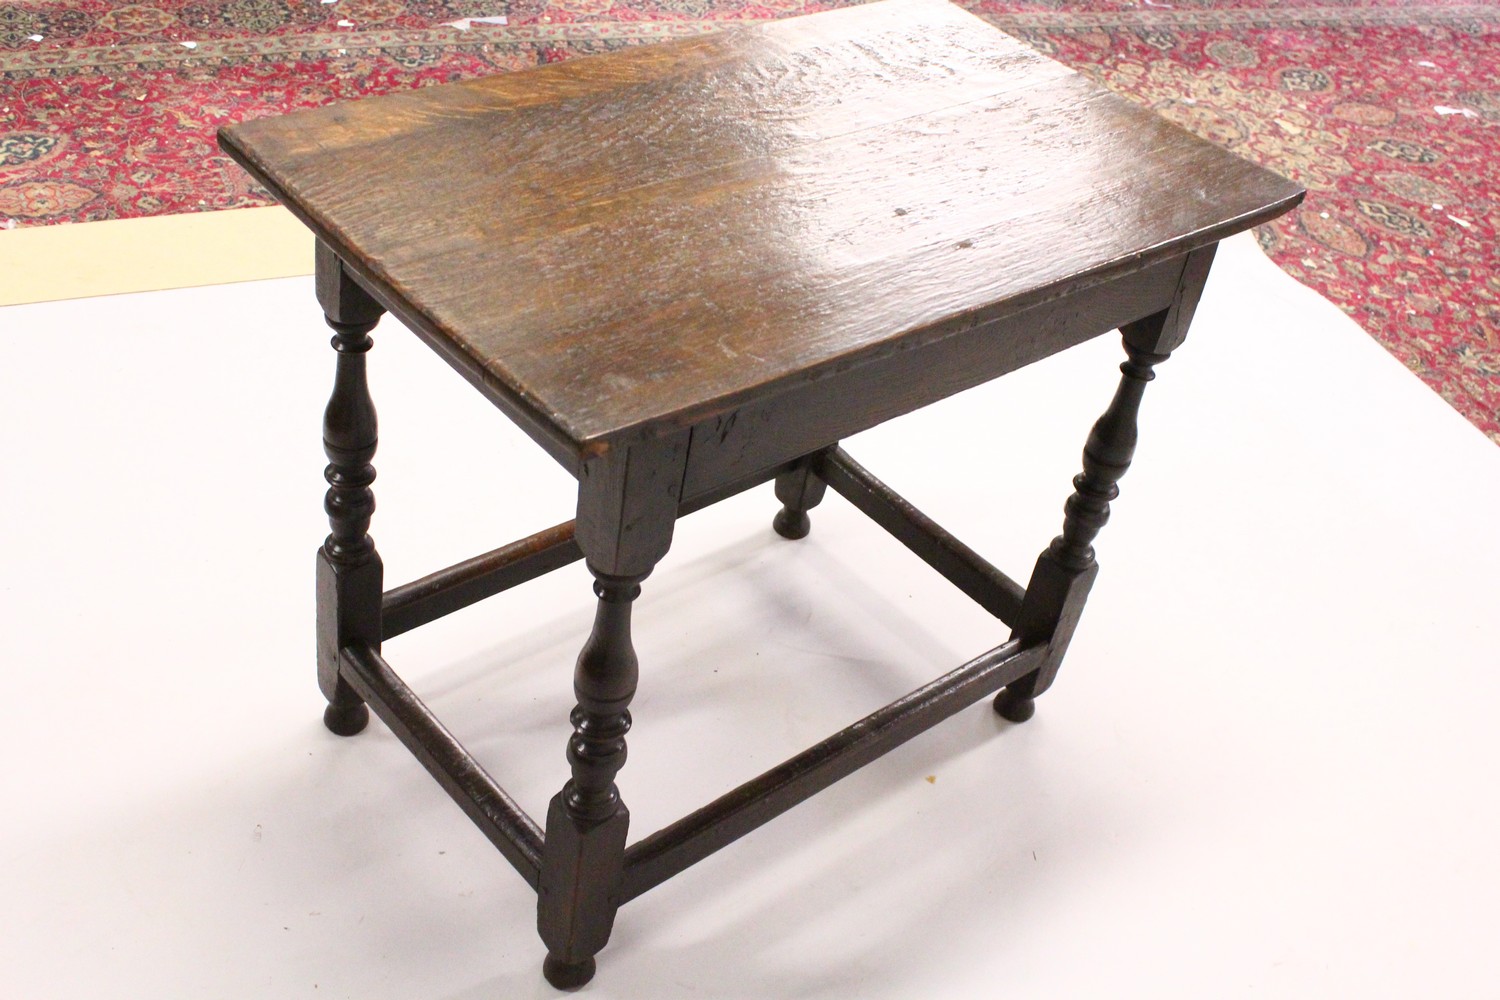 AN 18TH CENTURY OAK SIDE TABLE, with a single long drawer, on turned legs united by stretchers. 84cm - Image 9 of 11